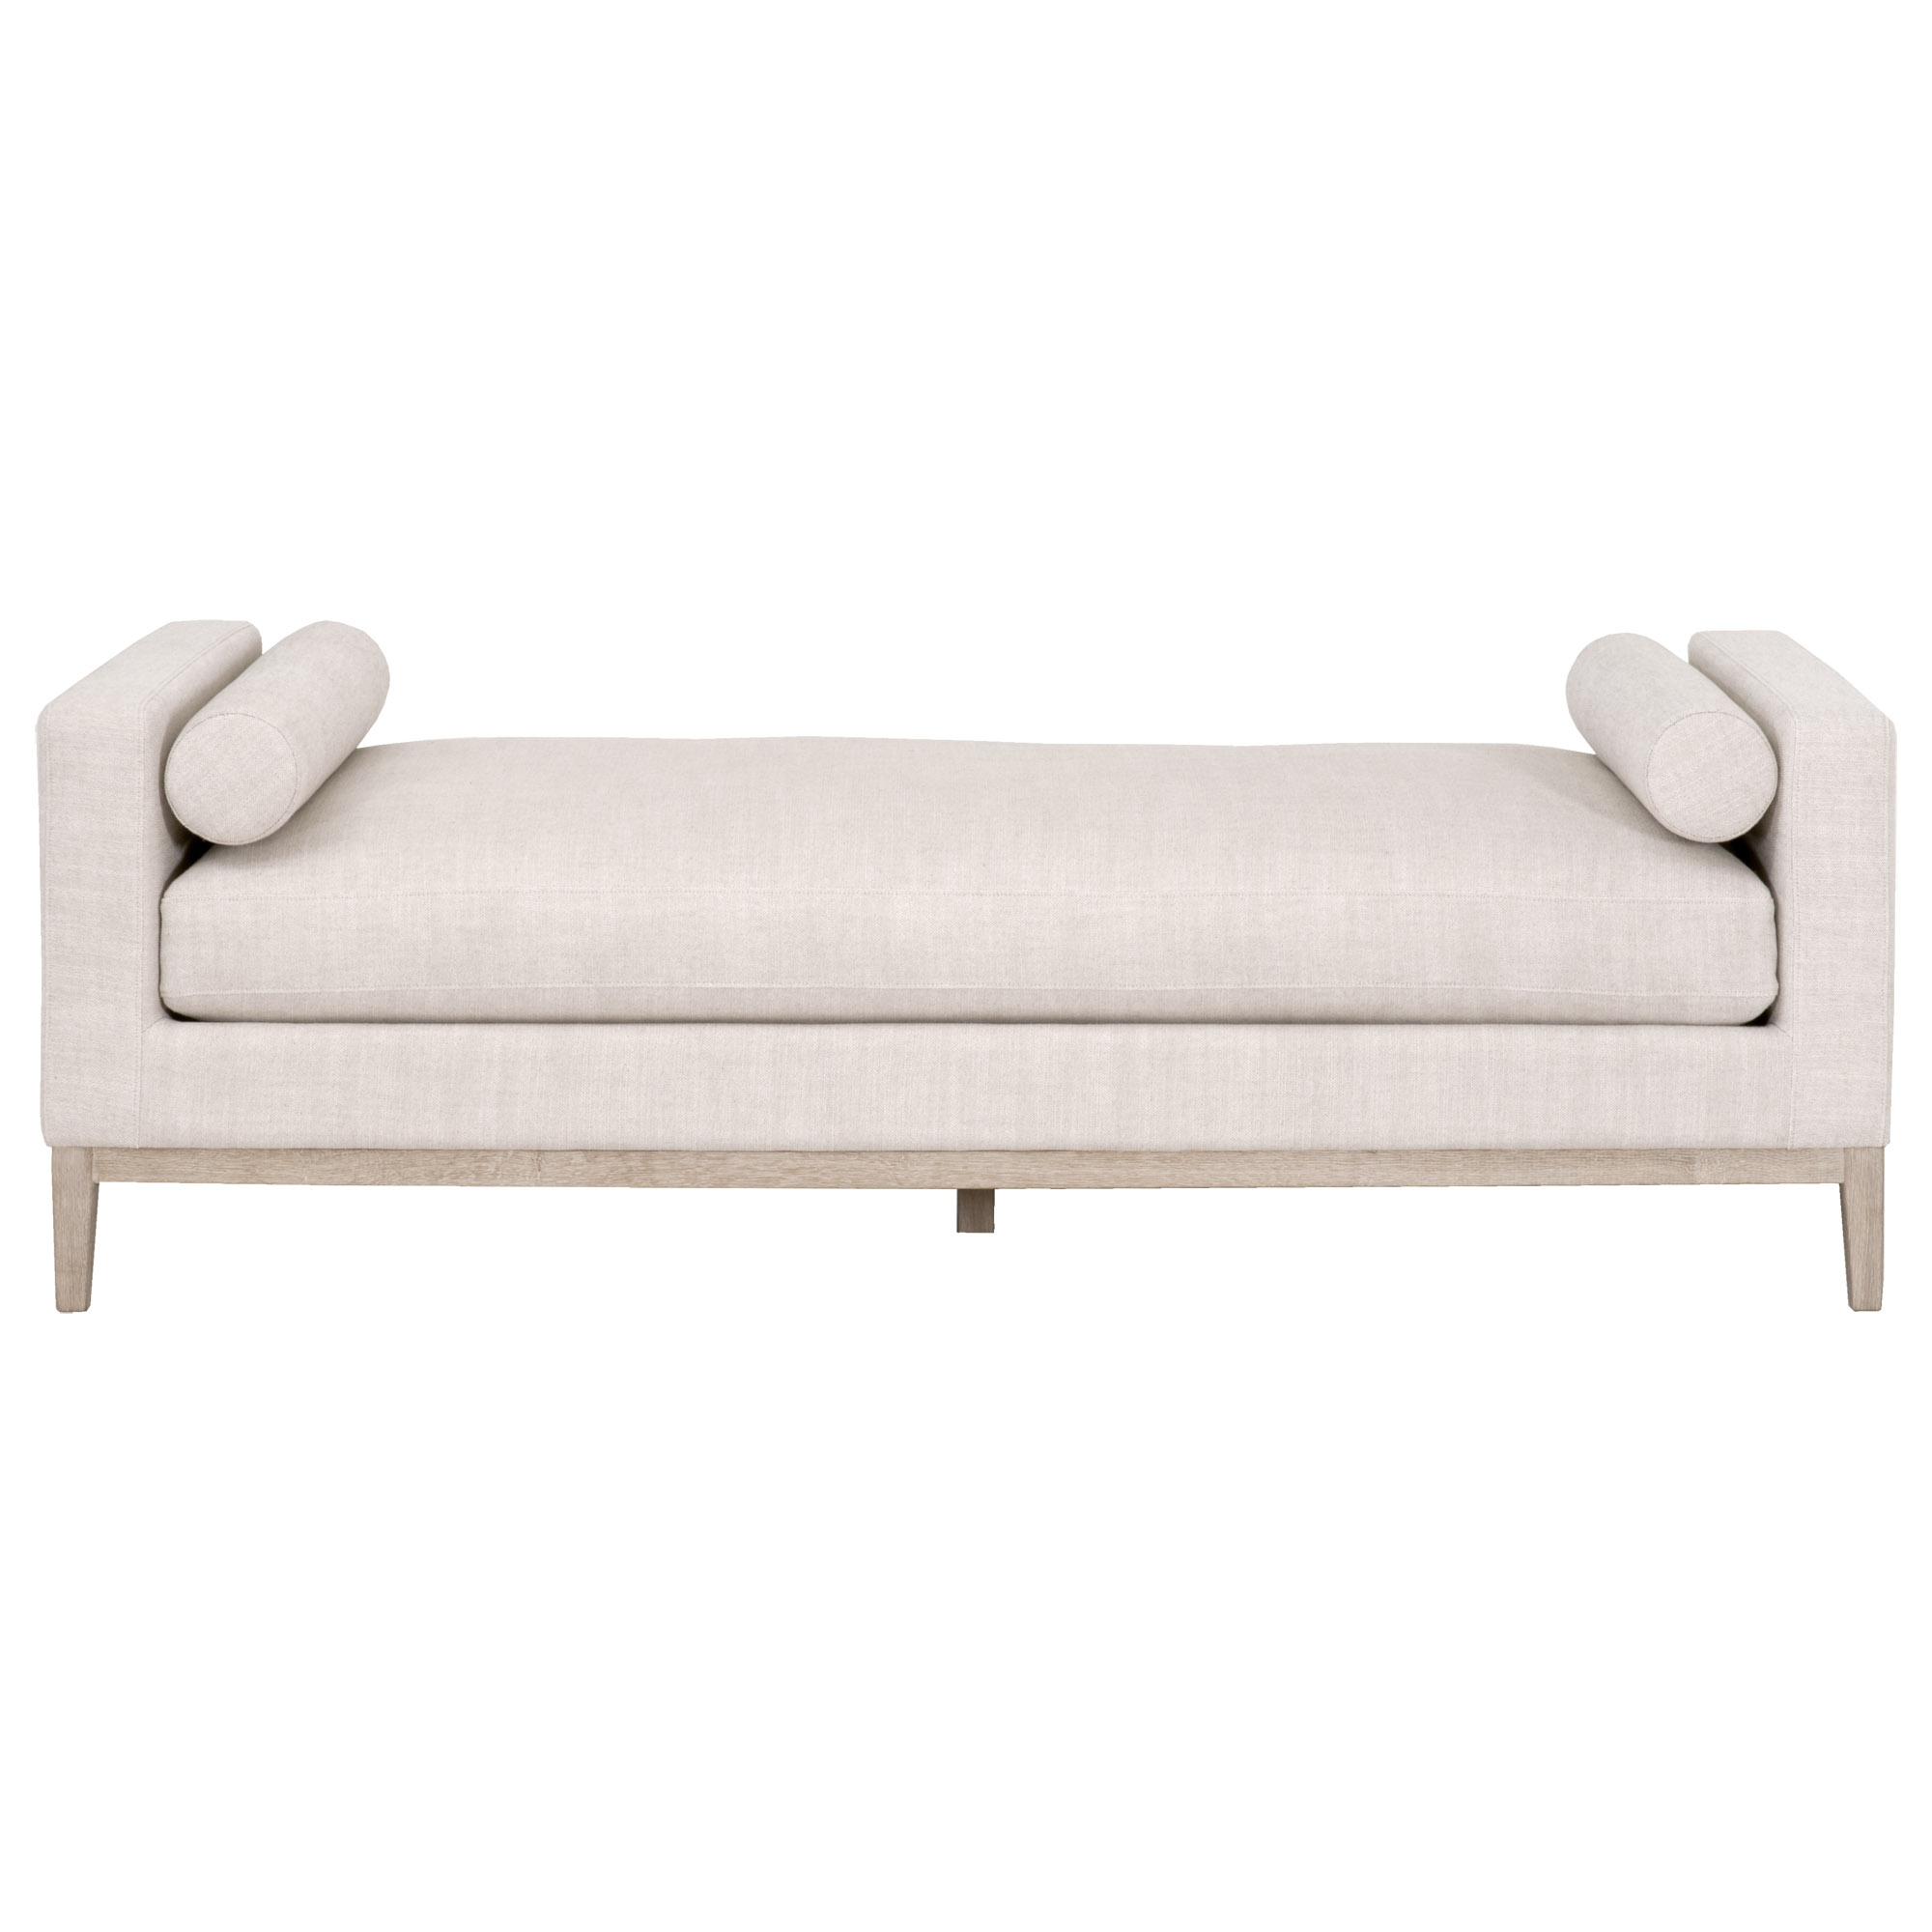 77.5"W x 33"D Keaton Daybed - Image 0